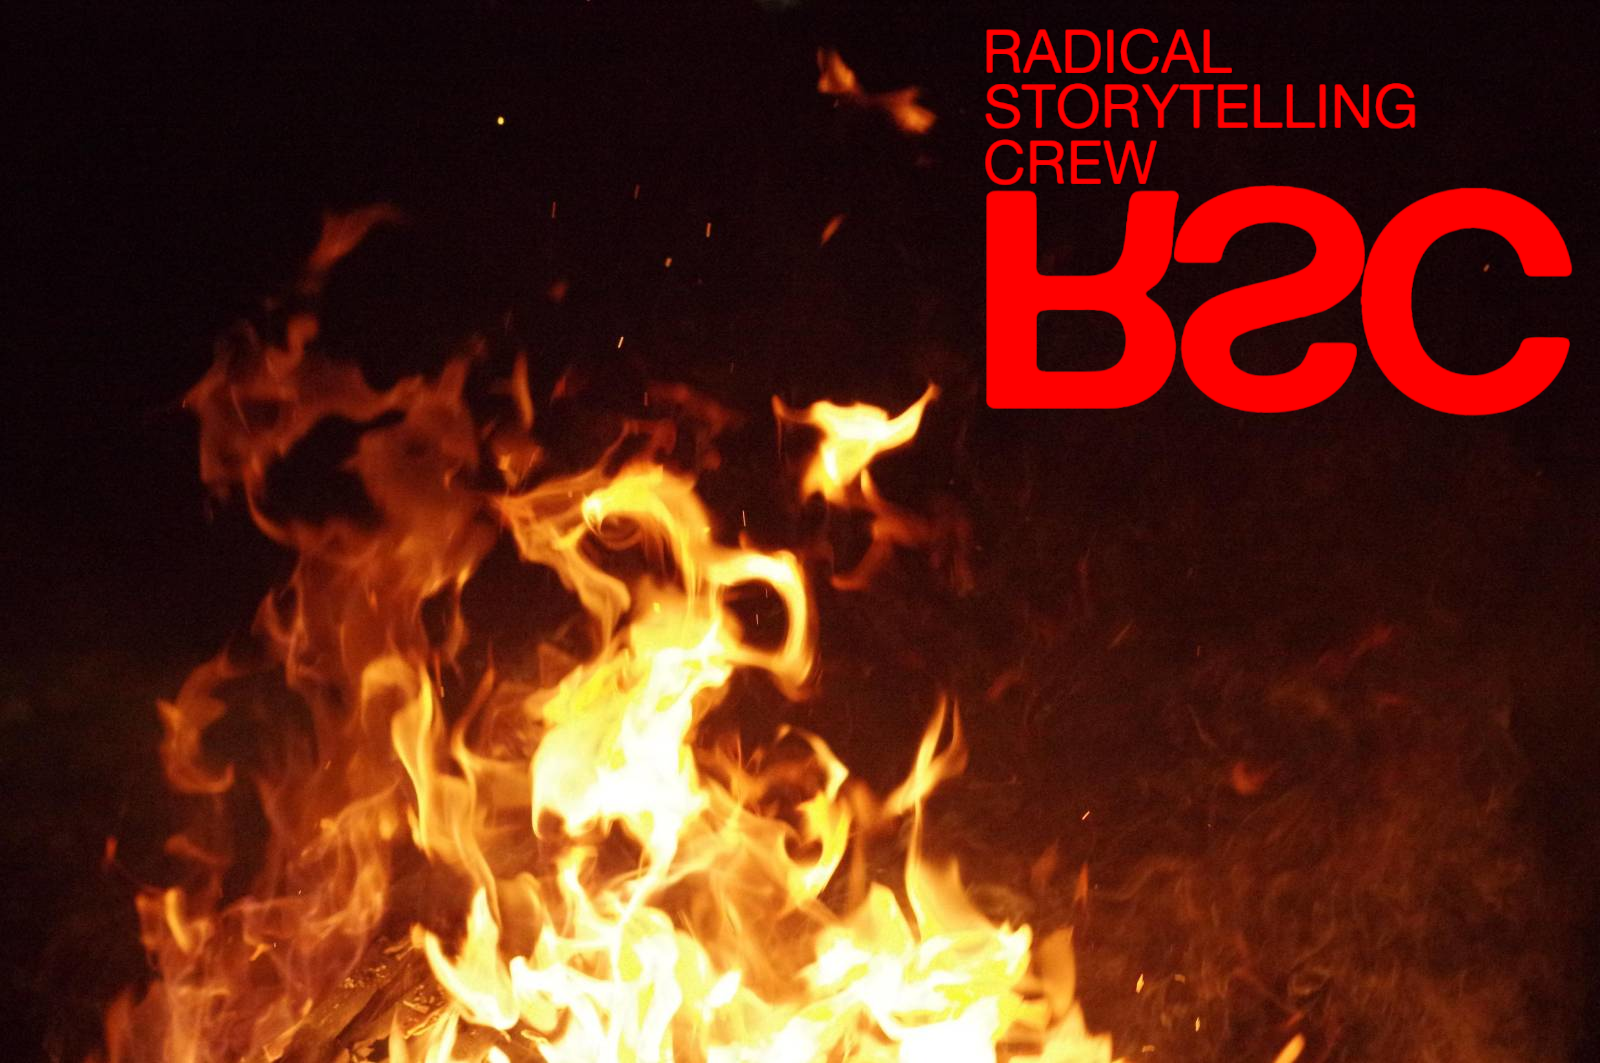 The logo of the RSC (Radical Storytelling Crew) against a large background of flames. In the flames you can make out the face of an ape.